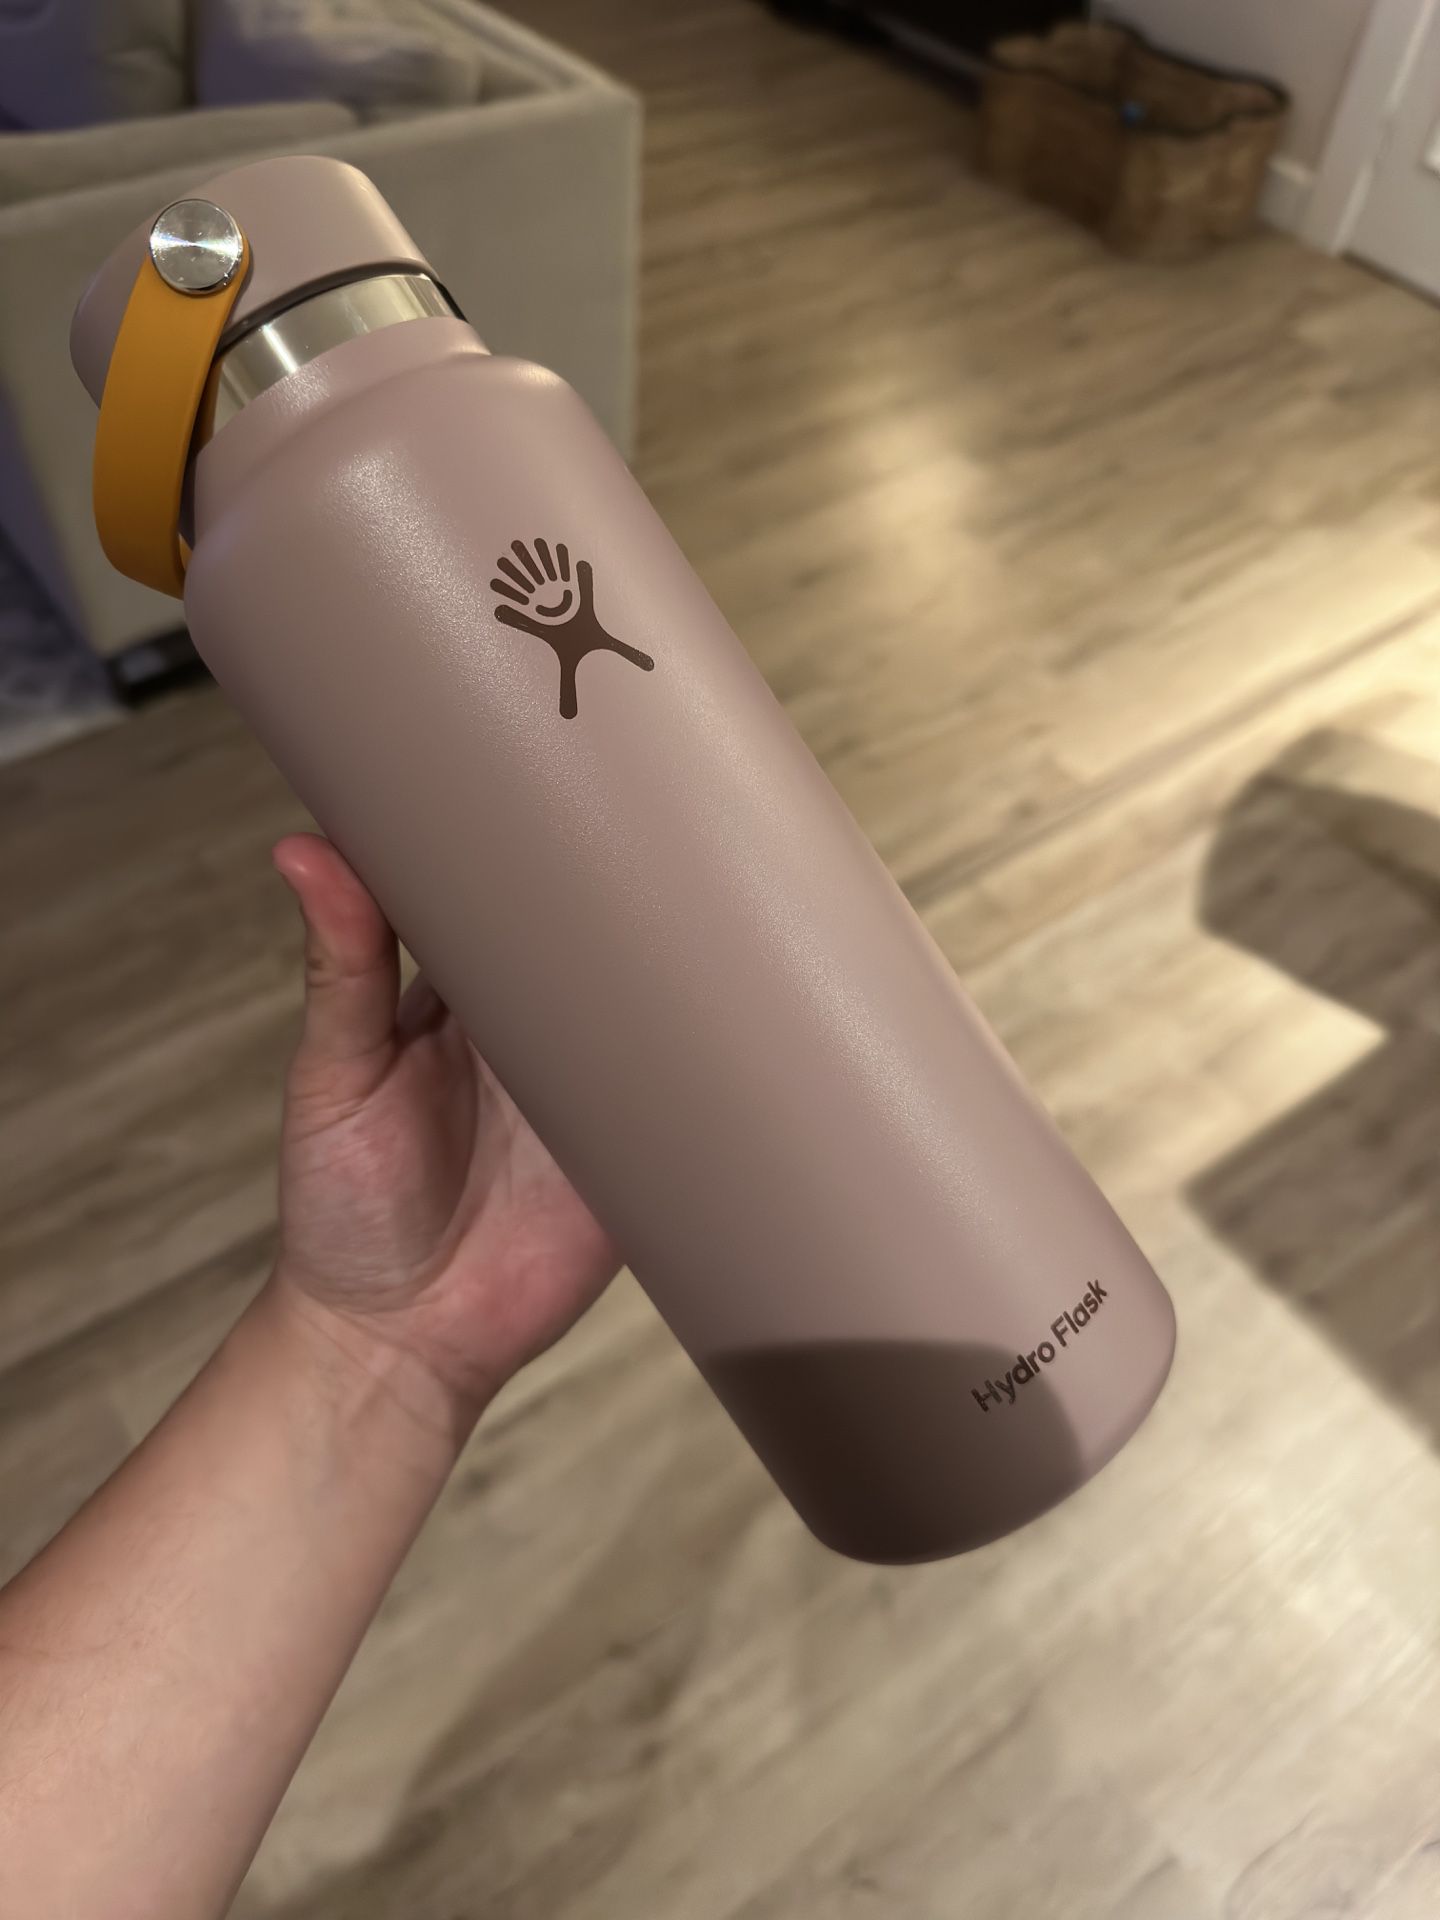 40 Oz Pink HydroFlask With Strawlid for Sale in La Verne, CA - OfferUp